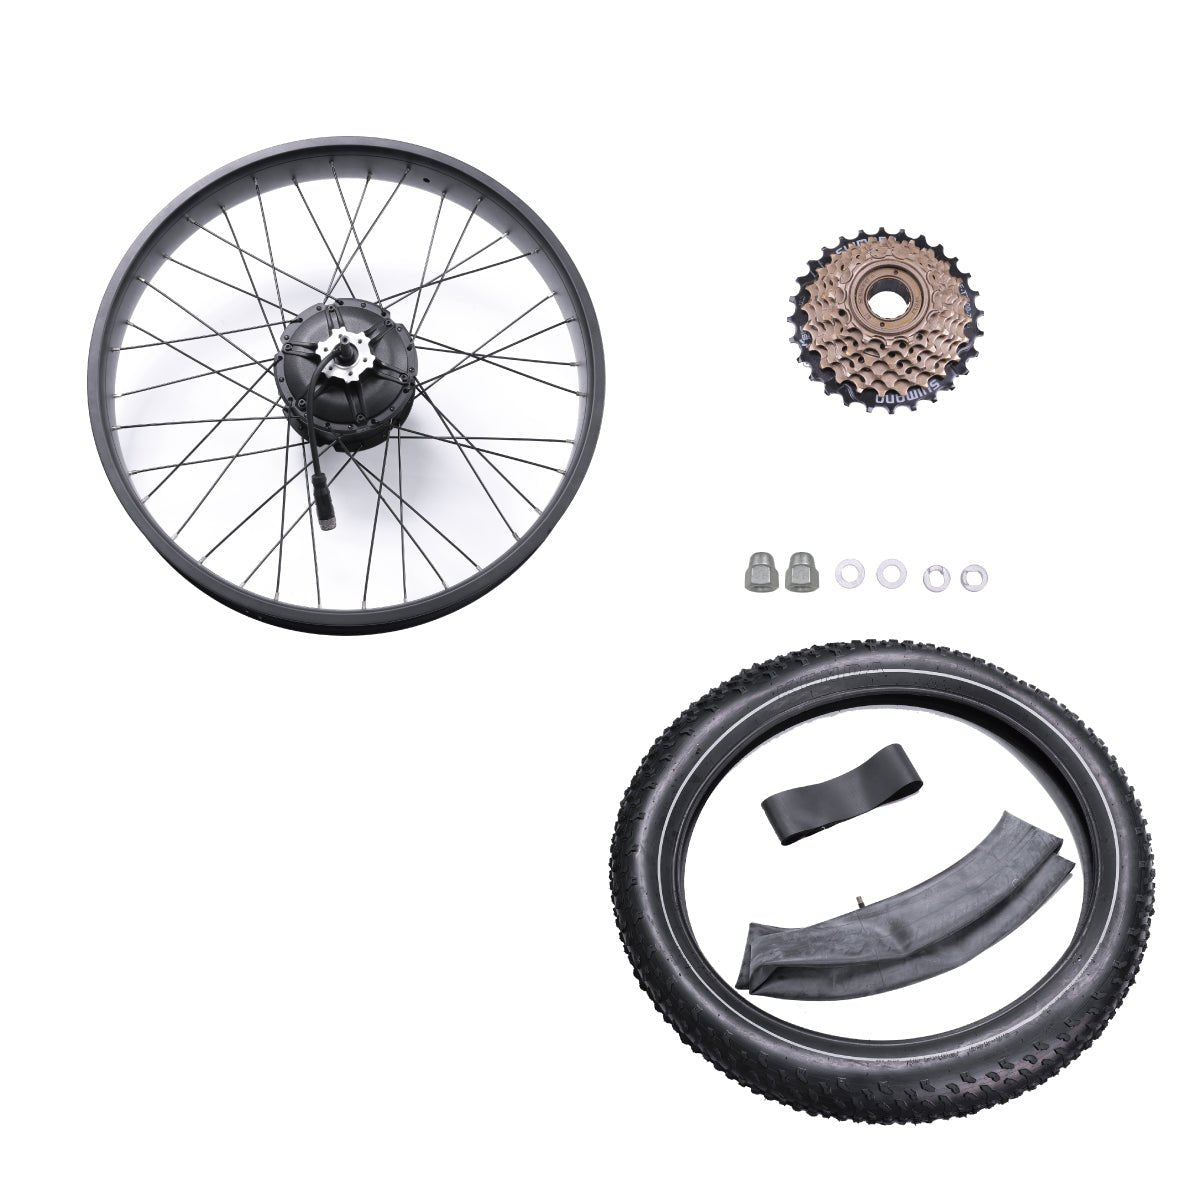 Wheel Assembly Replacement for Denago FAT Tire eBikes